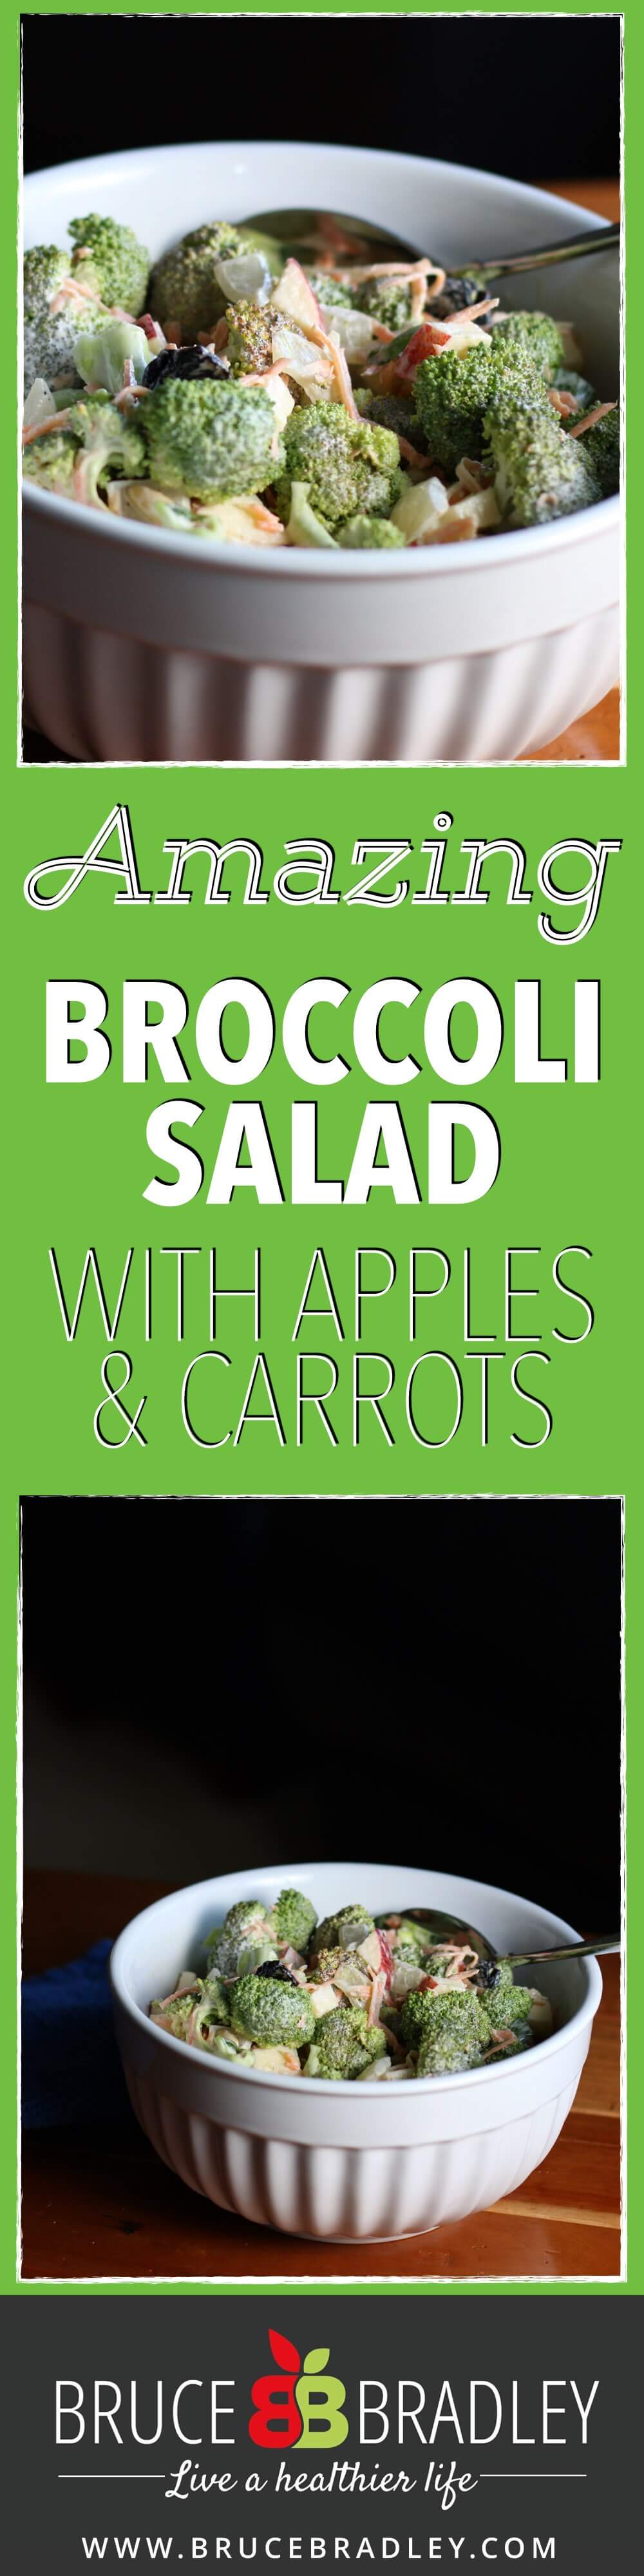 Bruce Bradley'S Broccoli Salad Is Perfect As A Main Dish Or Side, And Comes Together In Minutes! It'S A Great Way To Get Your Family Eating More Veggies And Fruit!